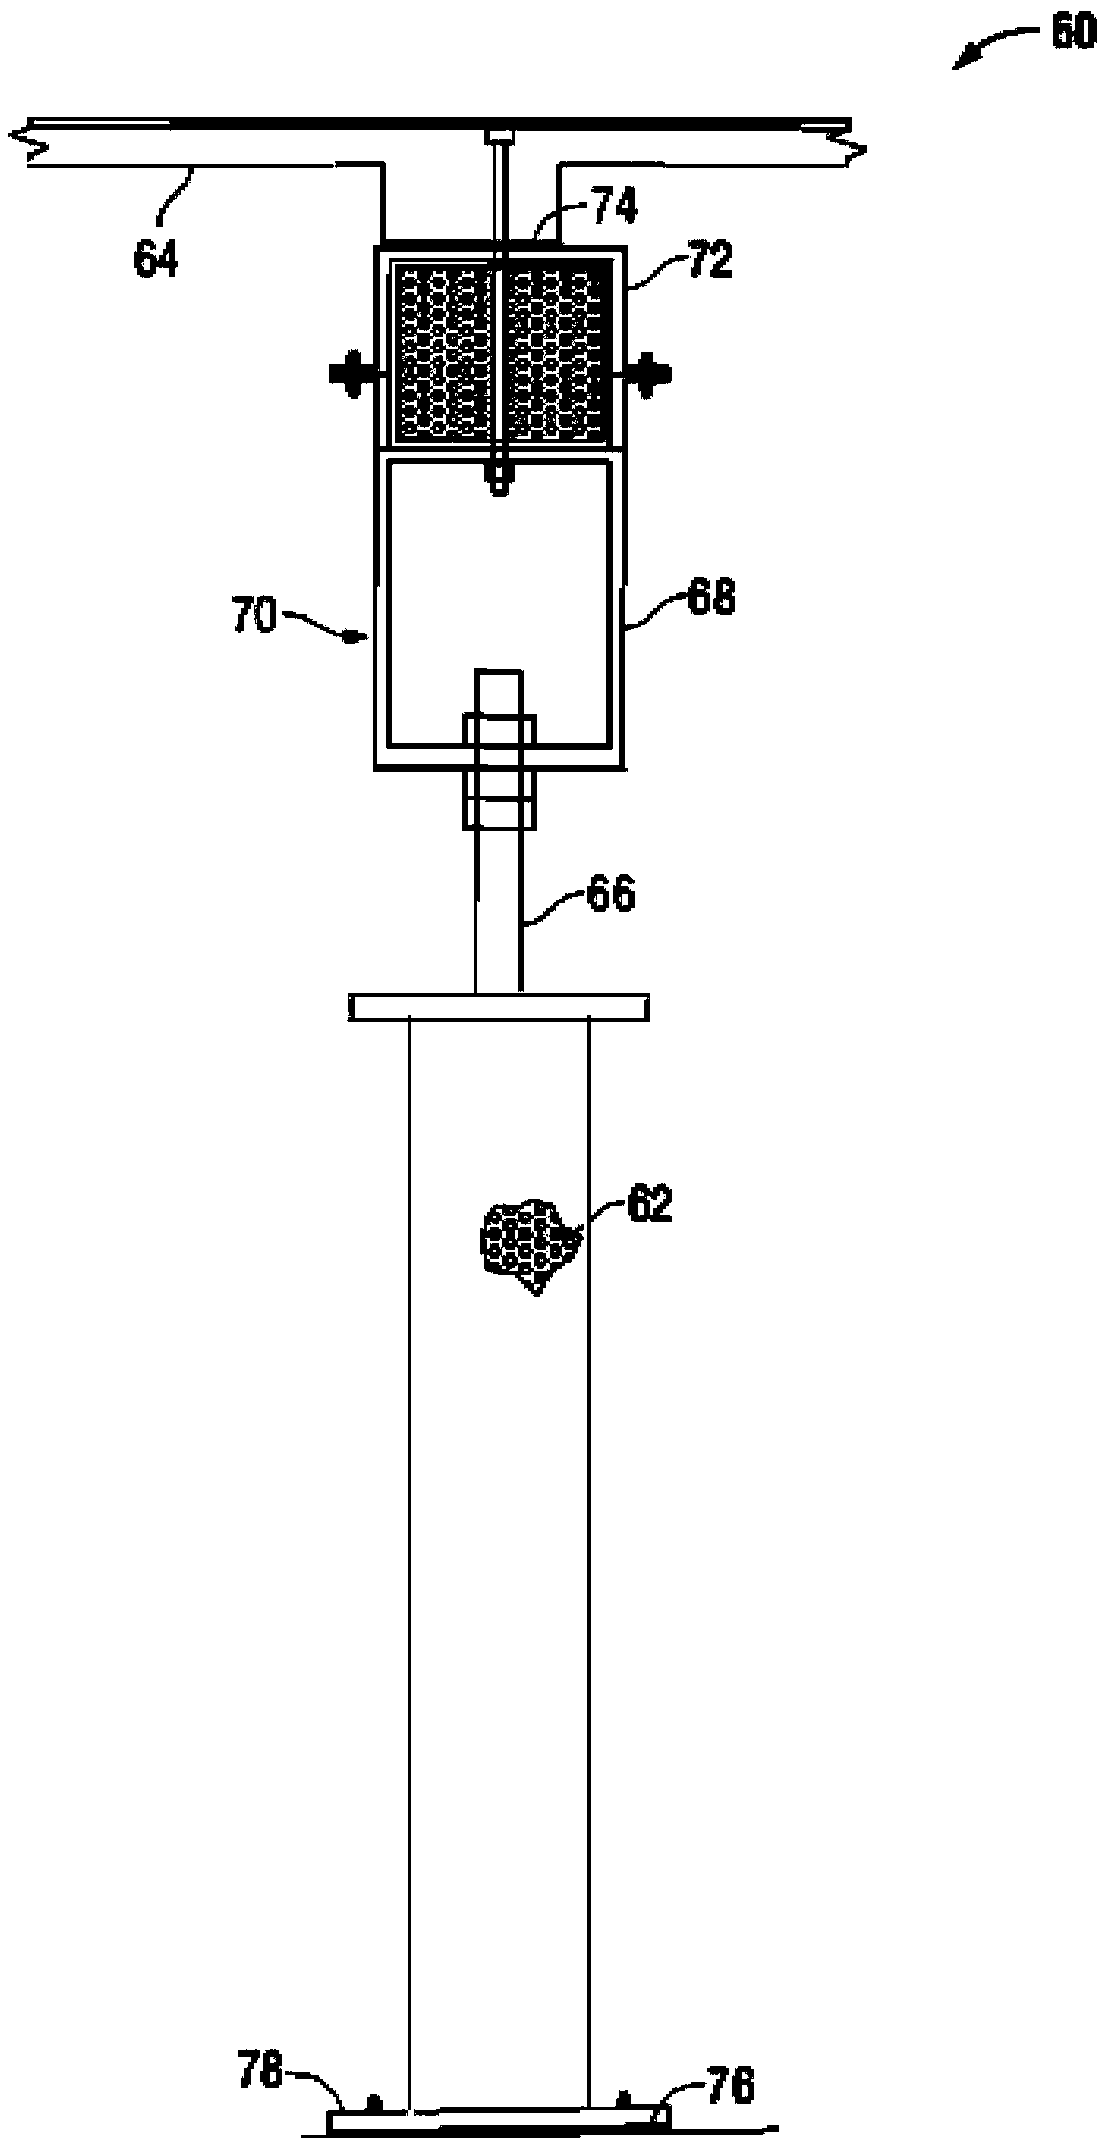 Method for improved semiconductor processing equipment tool pedestal/pad vibration isolation and reduction